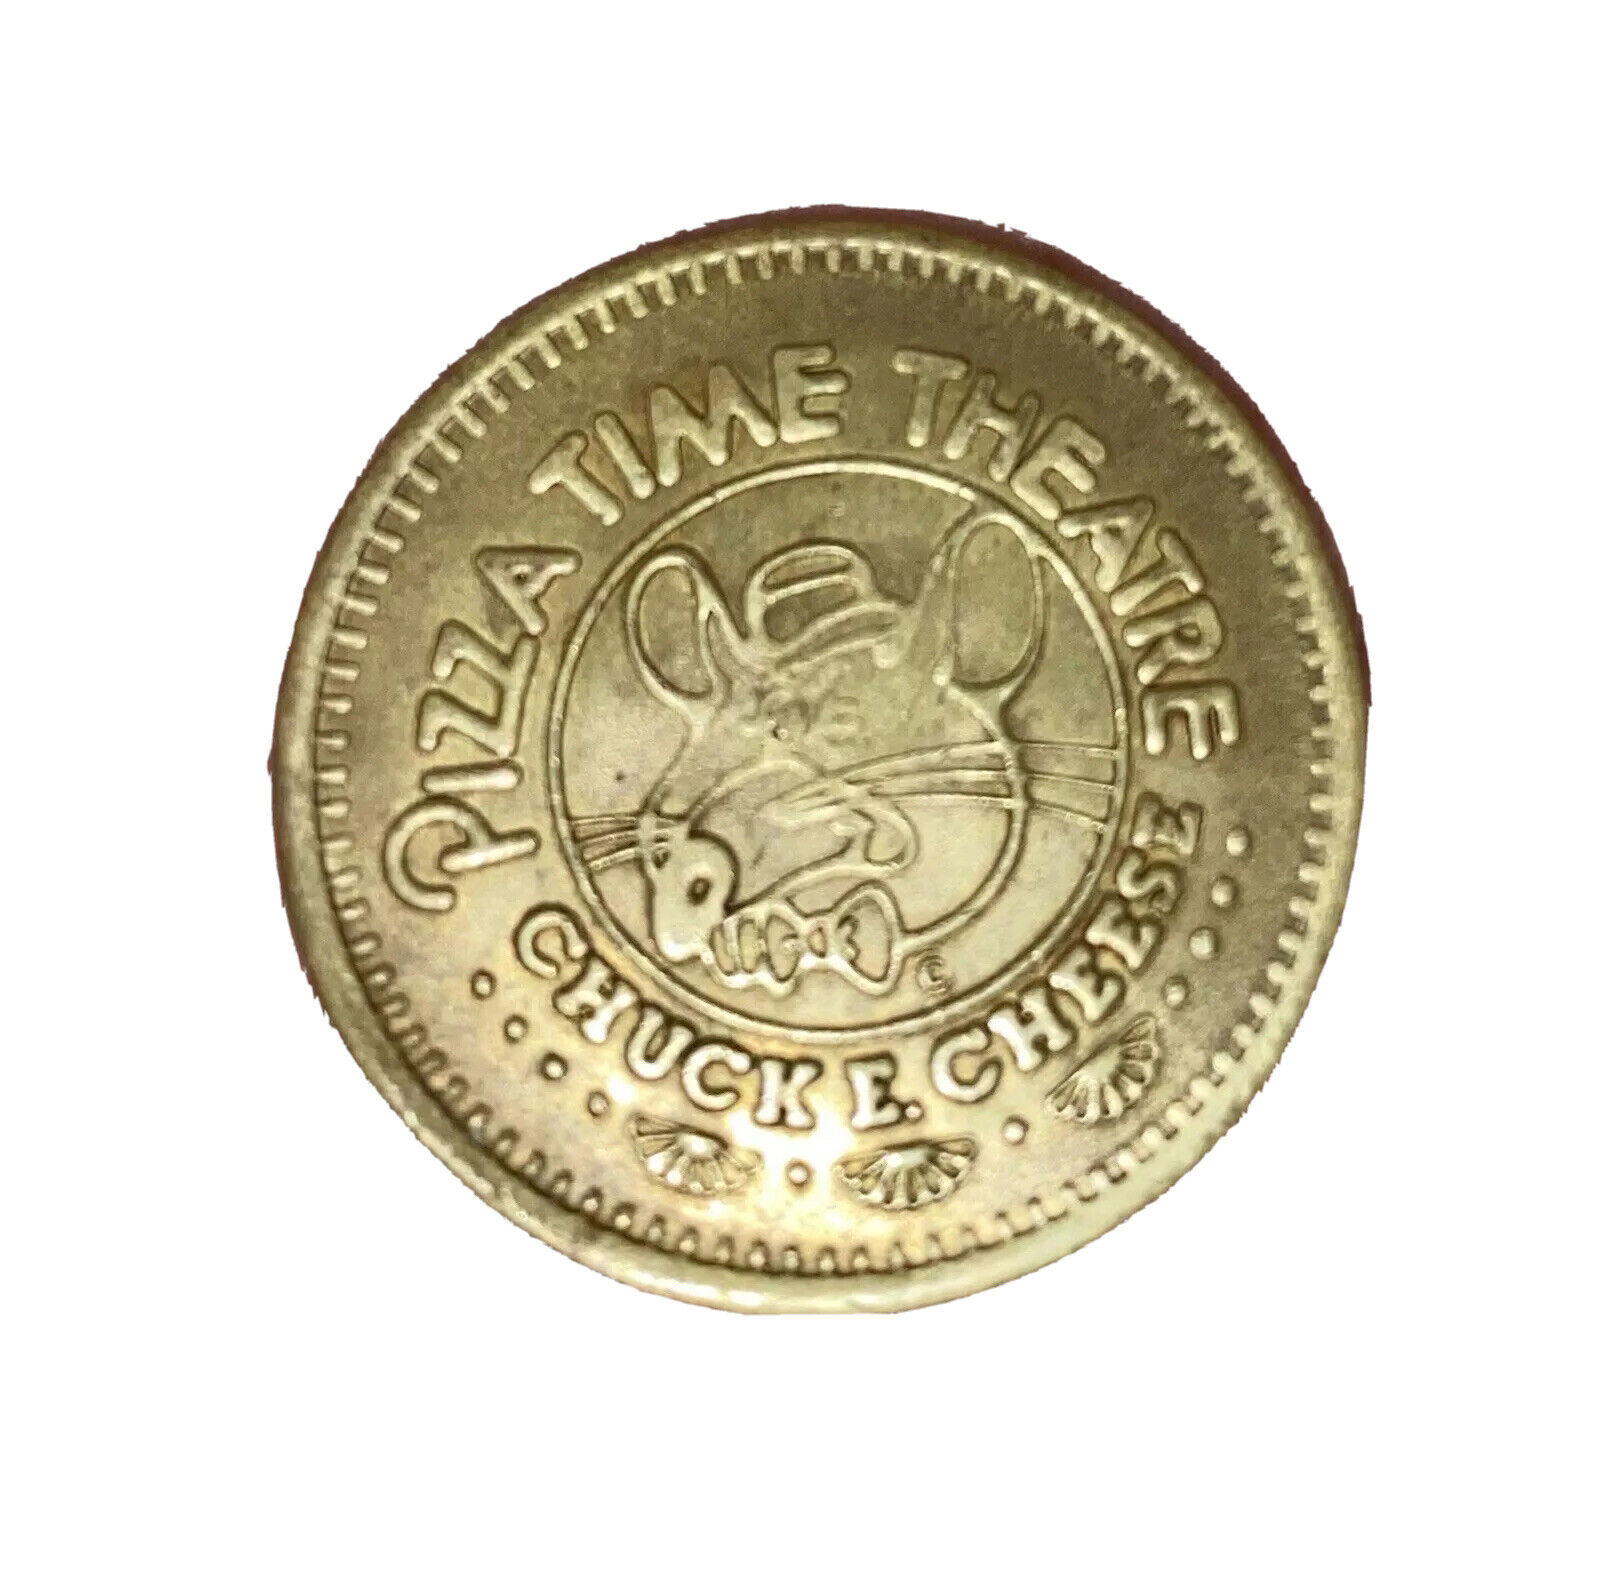 Old Chuck E cheese tokens | Museum of the Game Forums